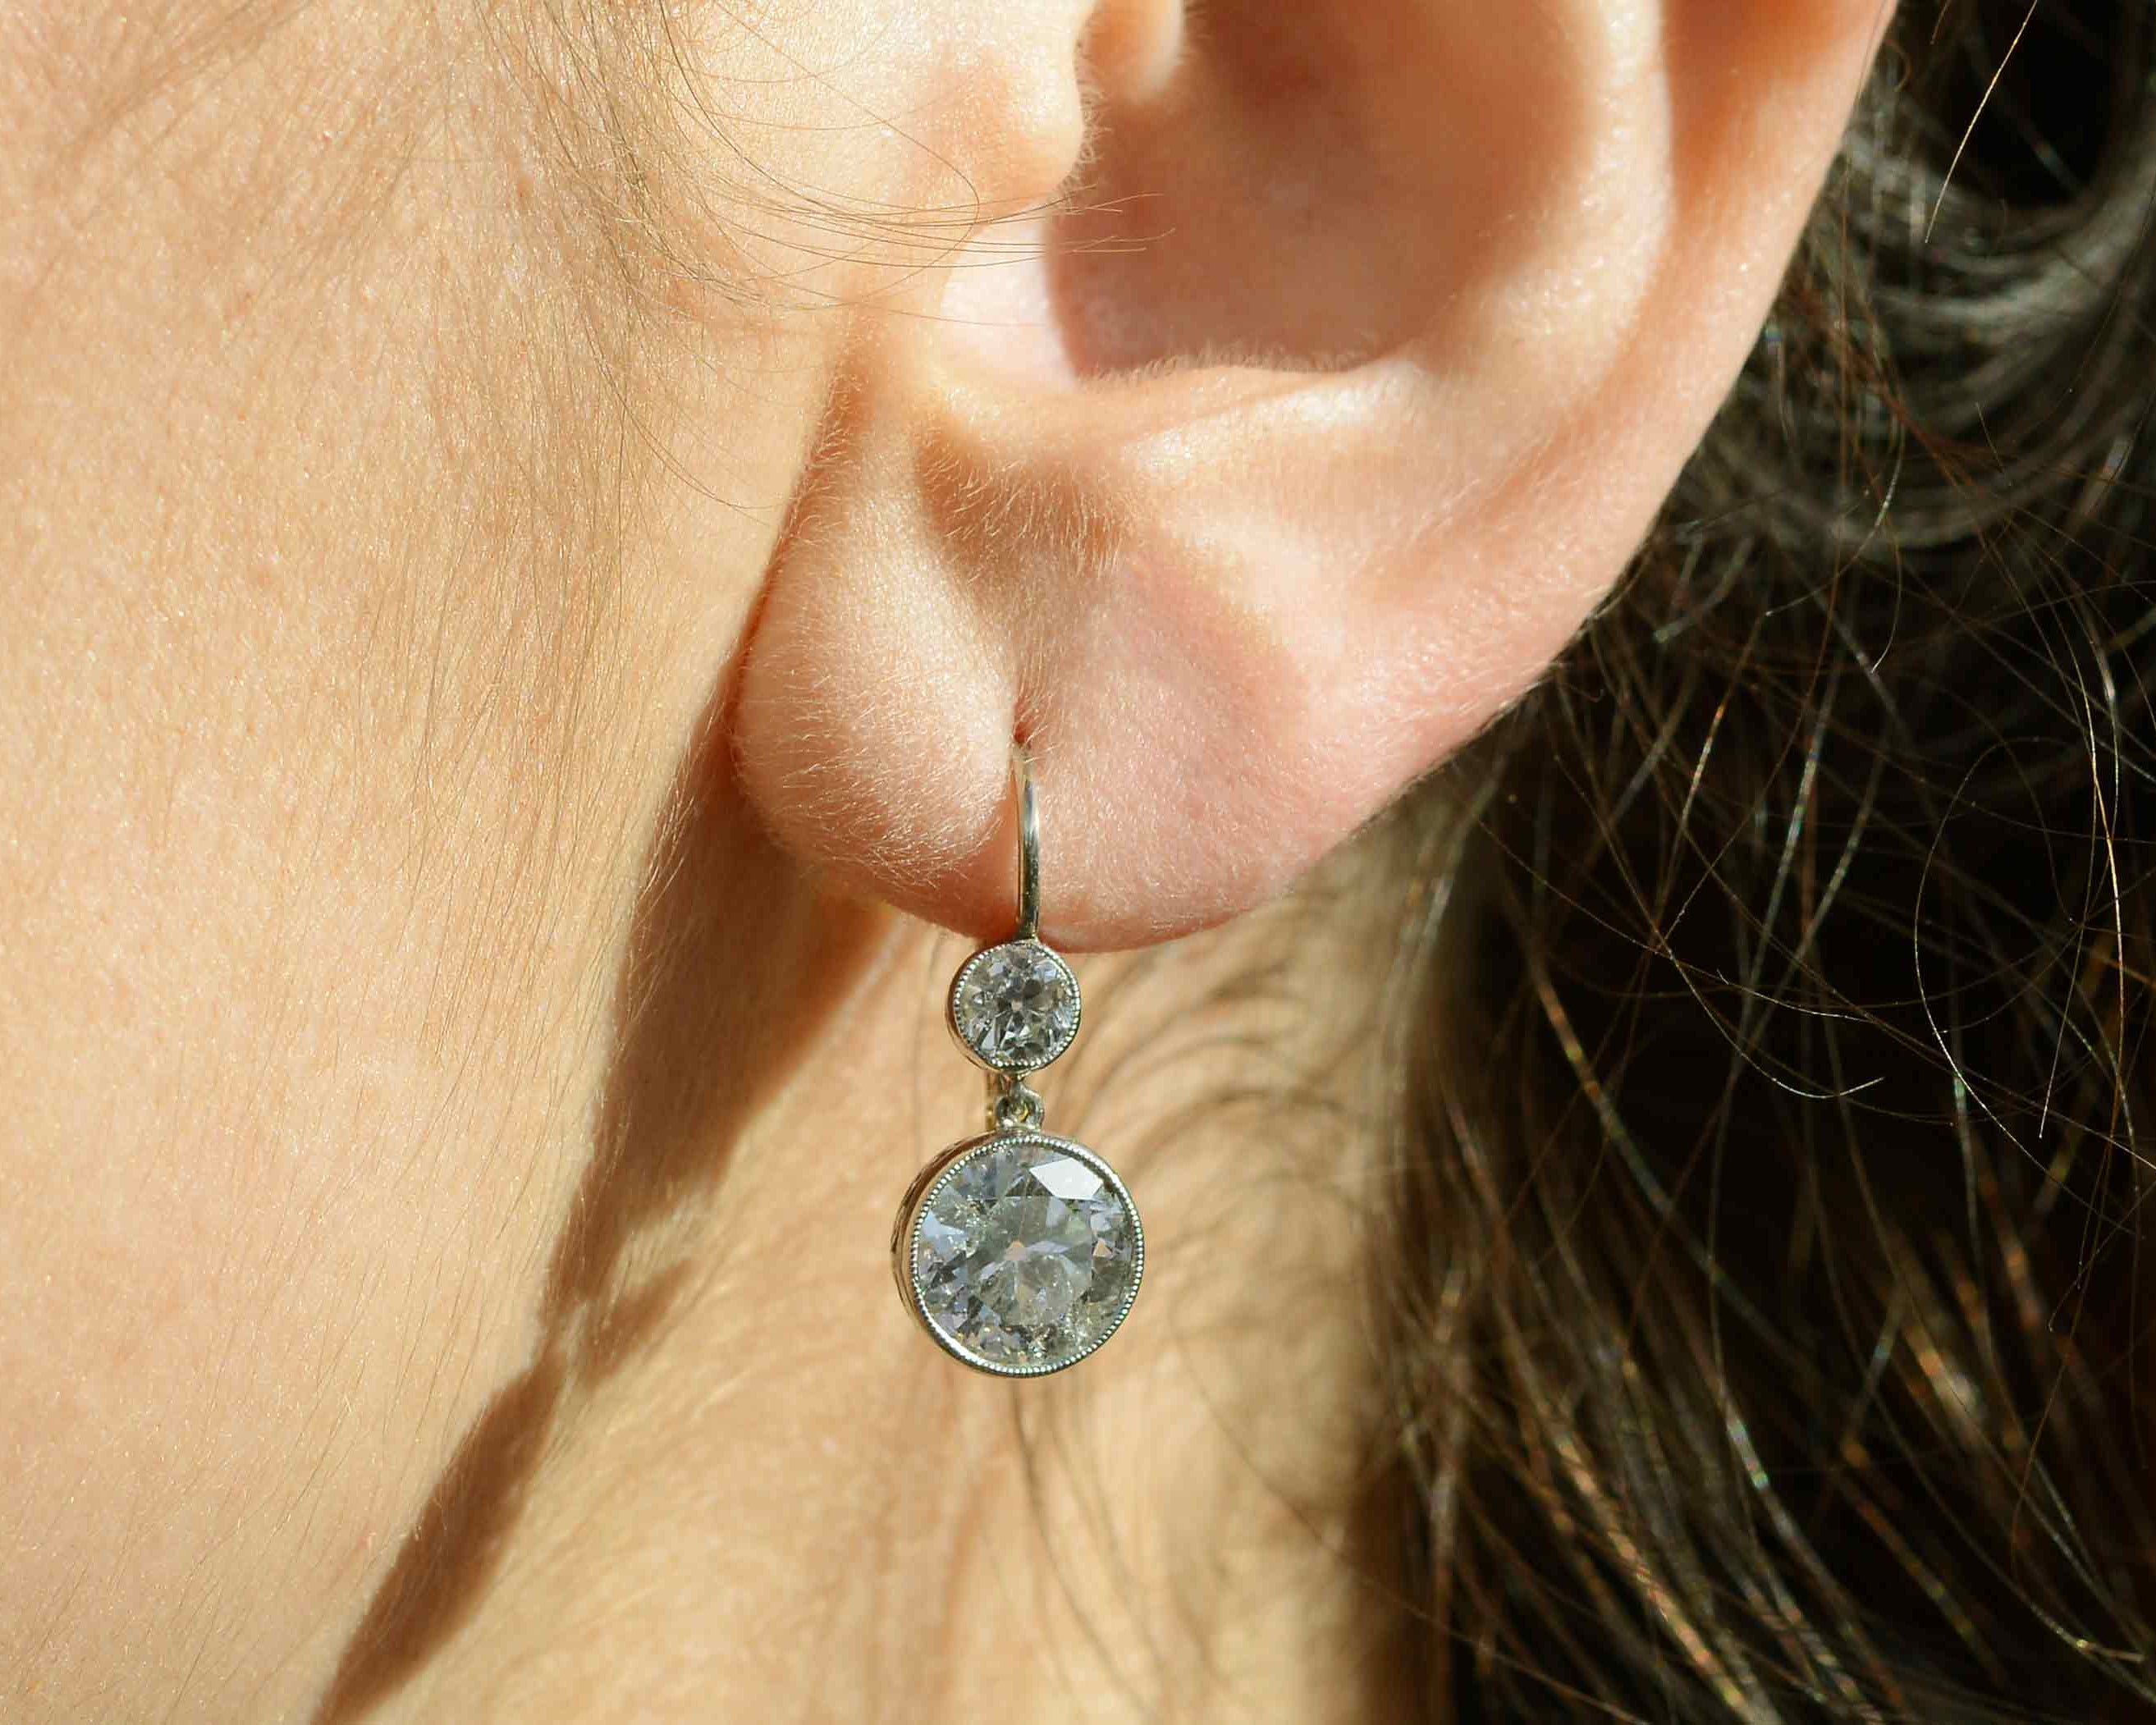 These drop dangle earrings also have old mine cut diamonds, 4 carats total.